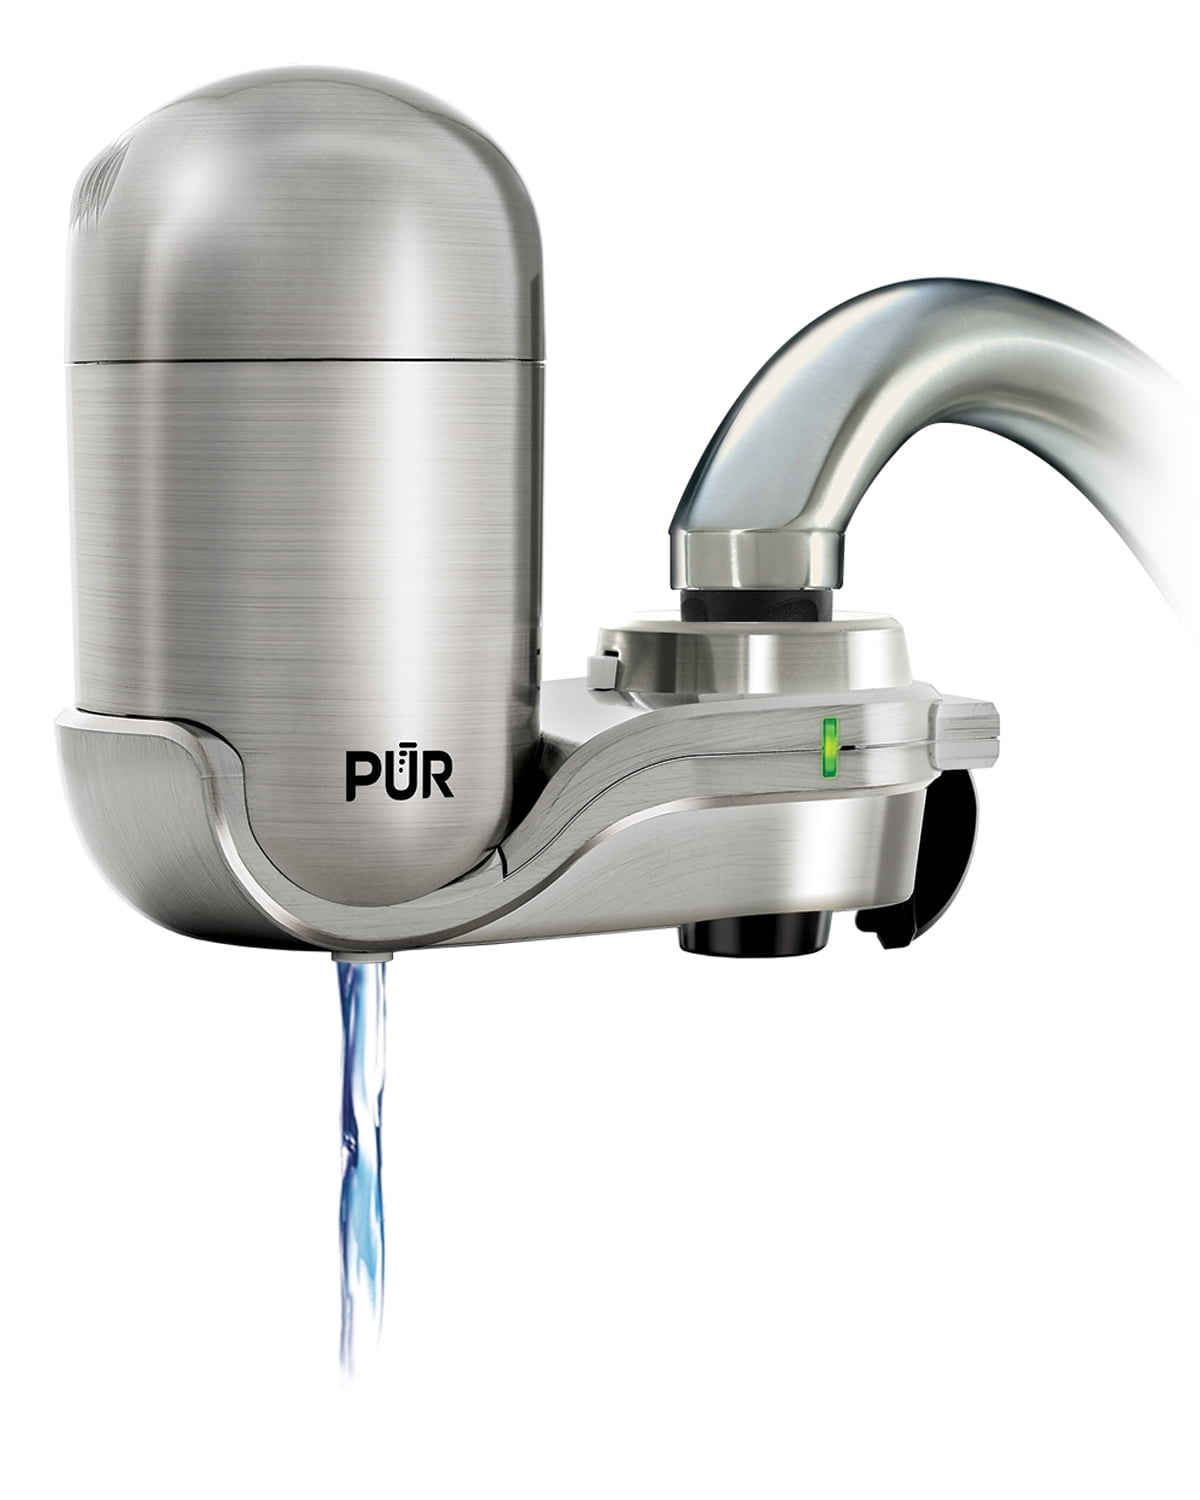 PUR NEW Advanced Faucet Water Filter Stainless Steel Style FM-4000B by PUR 